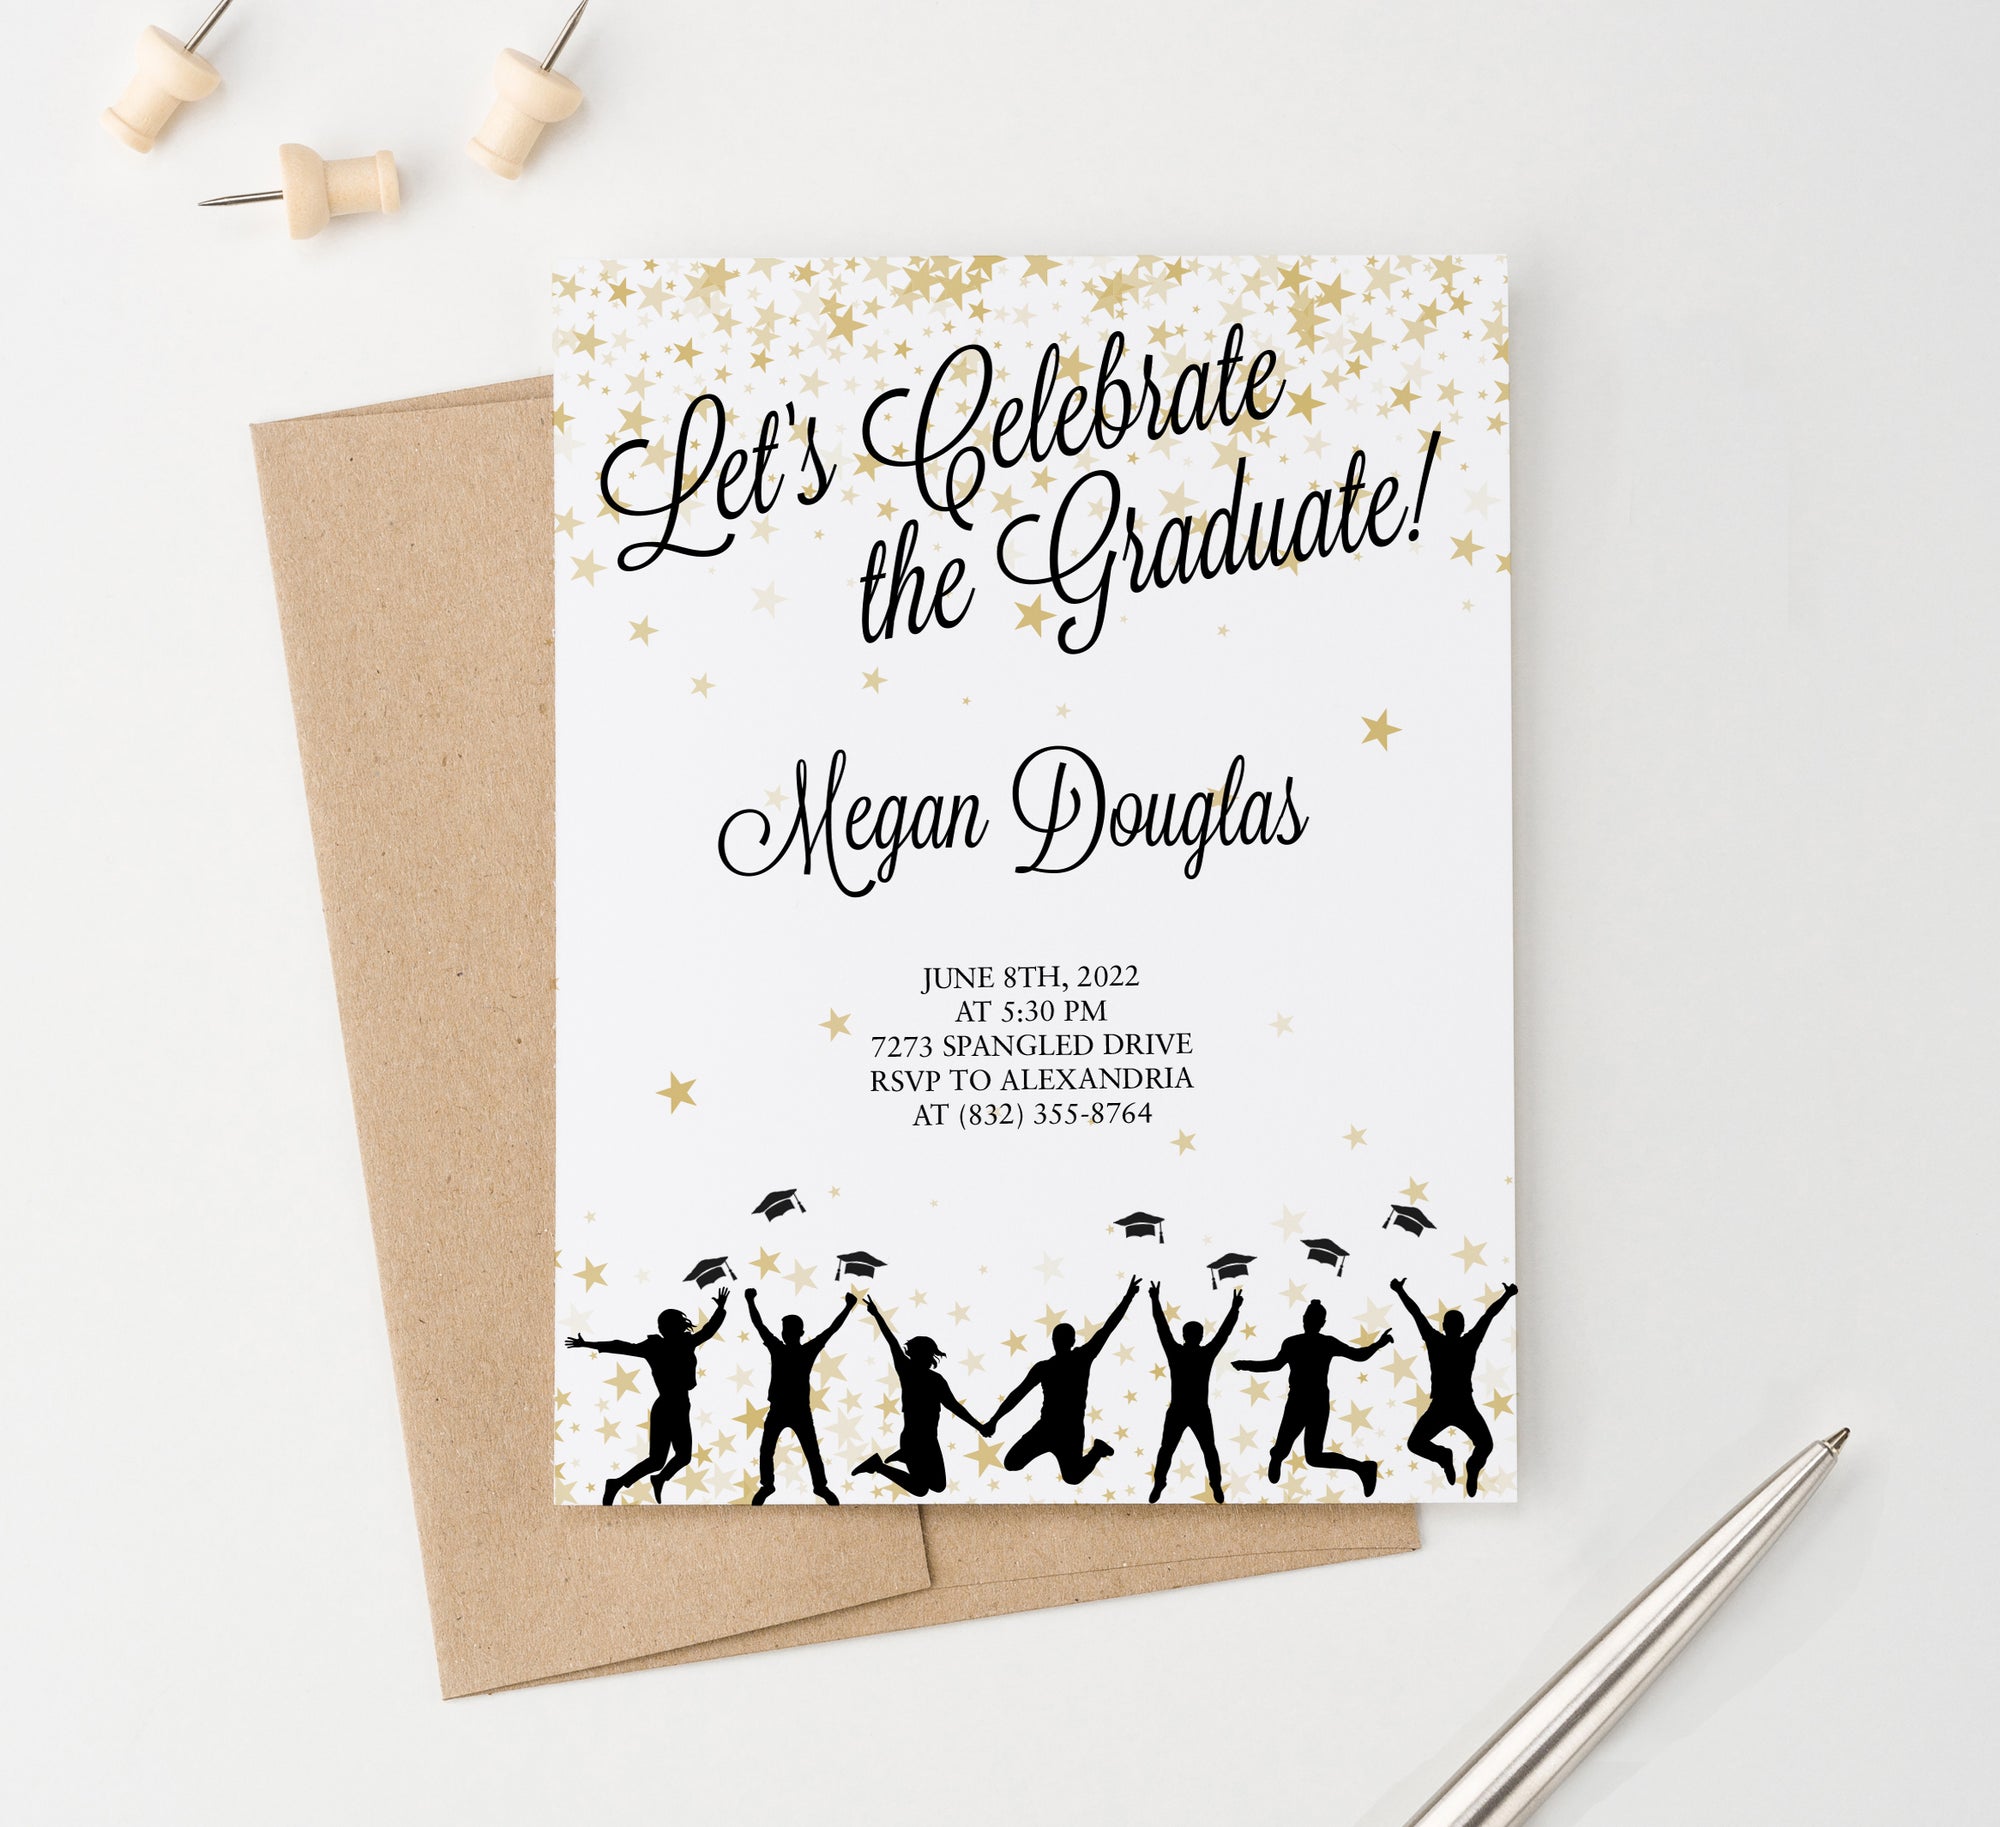    GPI005 Personalized Graduation Celebration Invites with Gold Stars silhouettes college high school